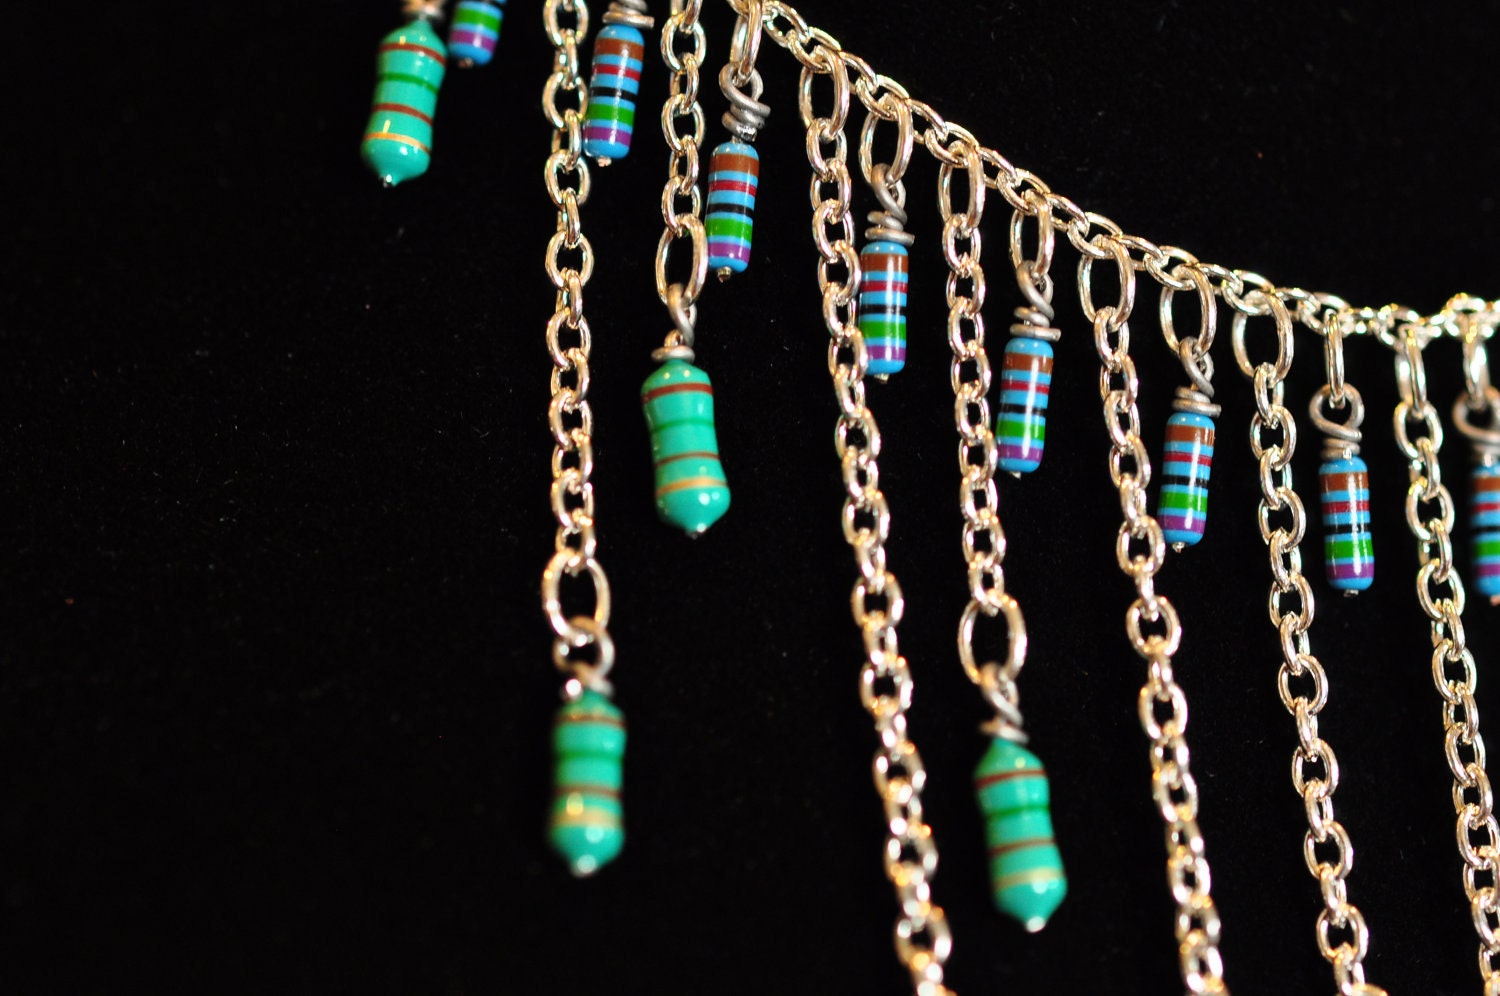 Resistor and Inductor necklace - One Week Sale